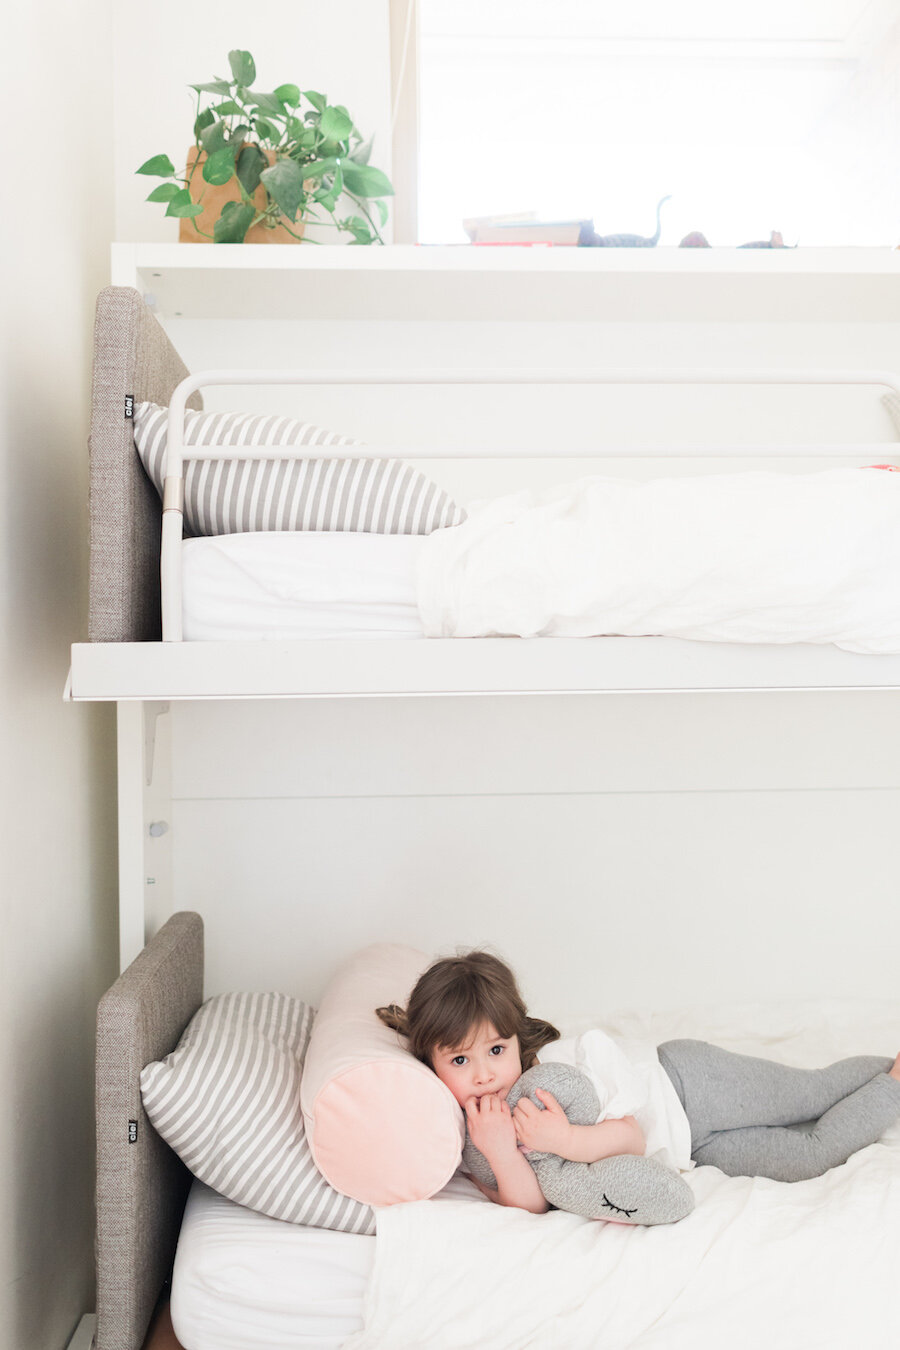 Reading Lights For Bunk Beds, Lighting Solutions For Bunk Beds